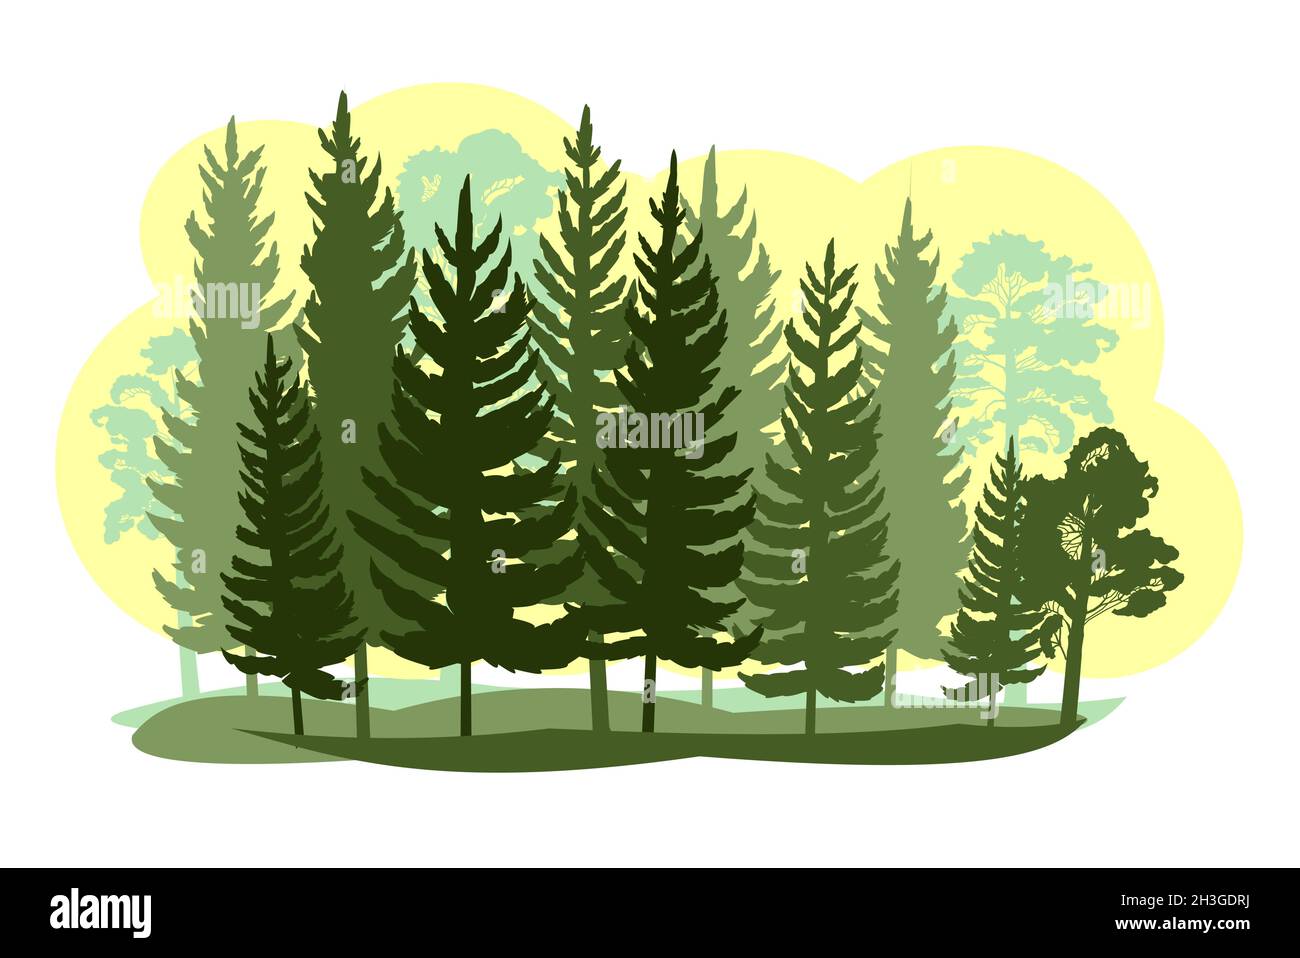 Forest silhouette scene. Landscape with coniferous trees. Beautiful view. Pine and spruce trees. Summer nature. Isolated illustration vector Stock Vector